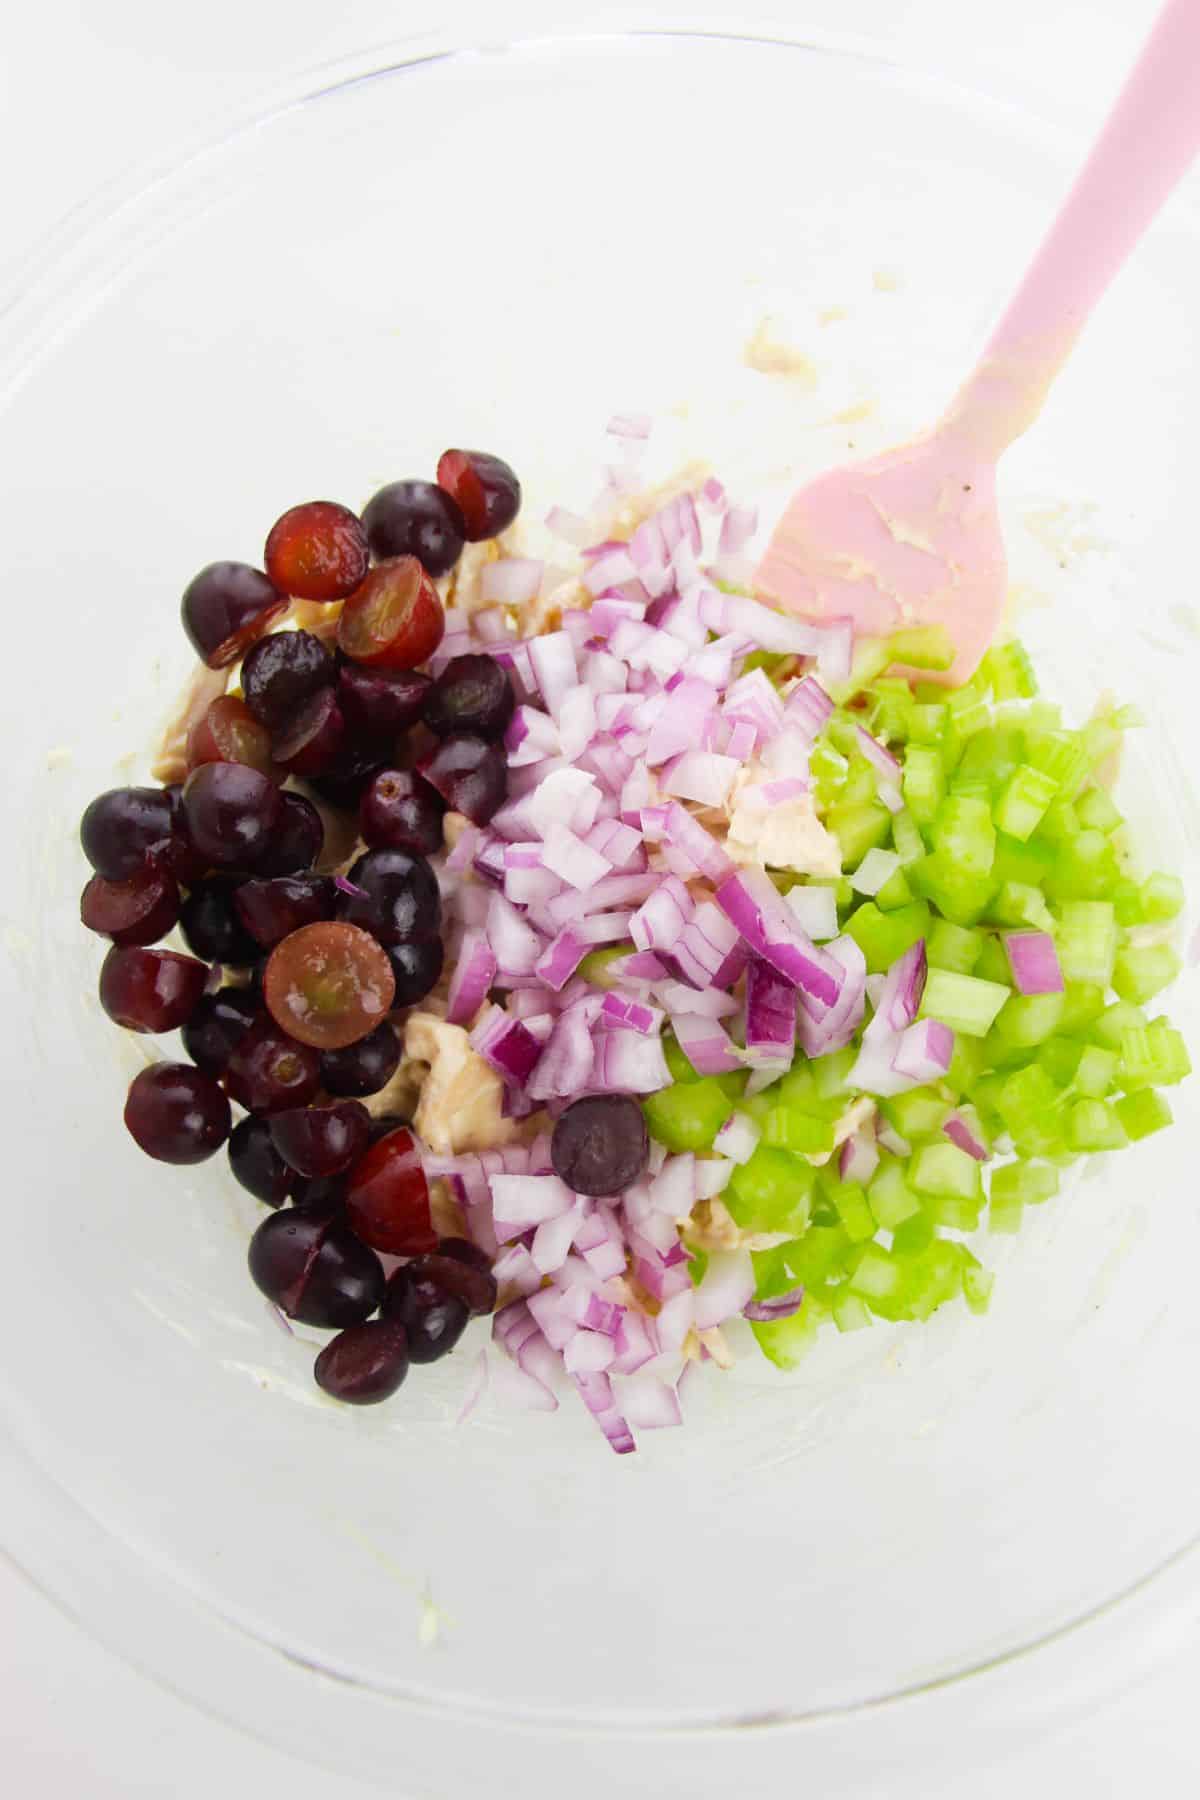 celery, onion, and grapes are added to the mixture in a large bowl with pink spatula.